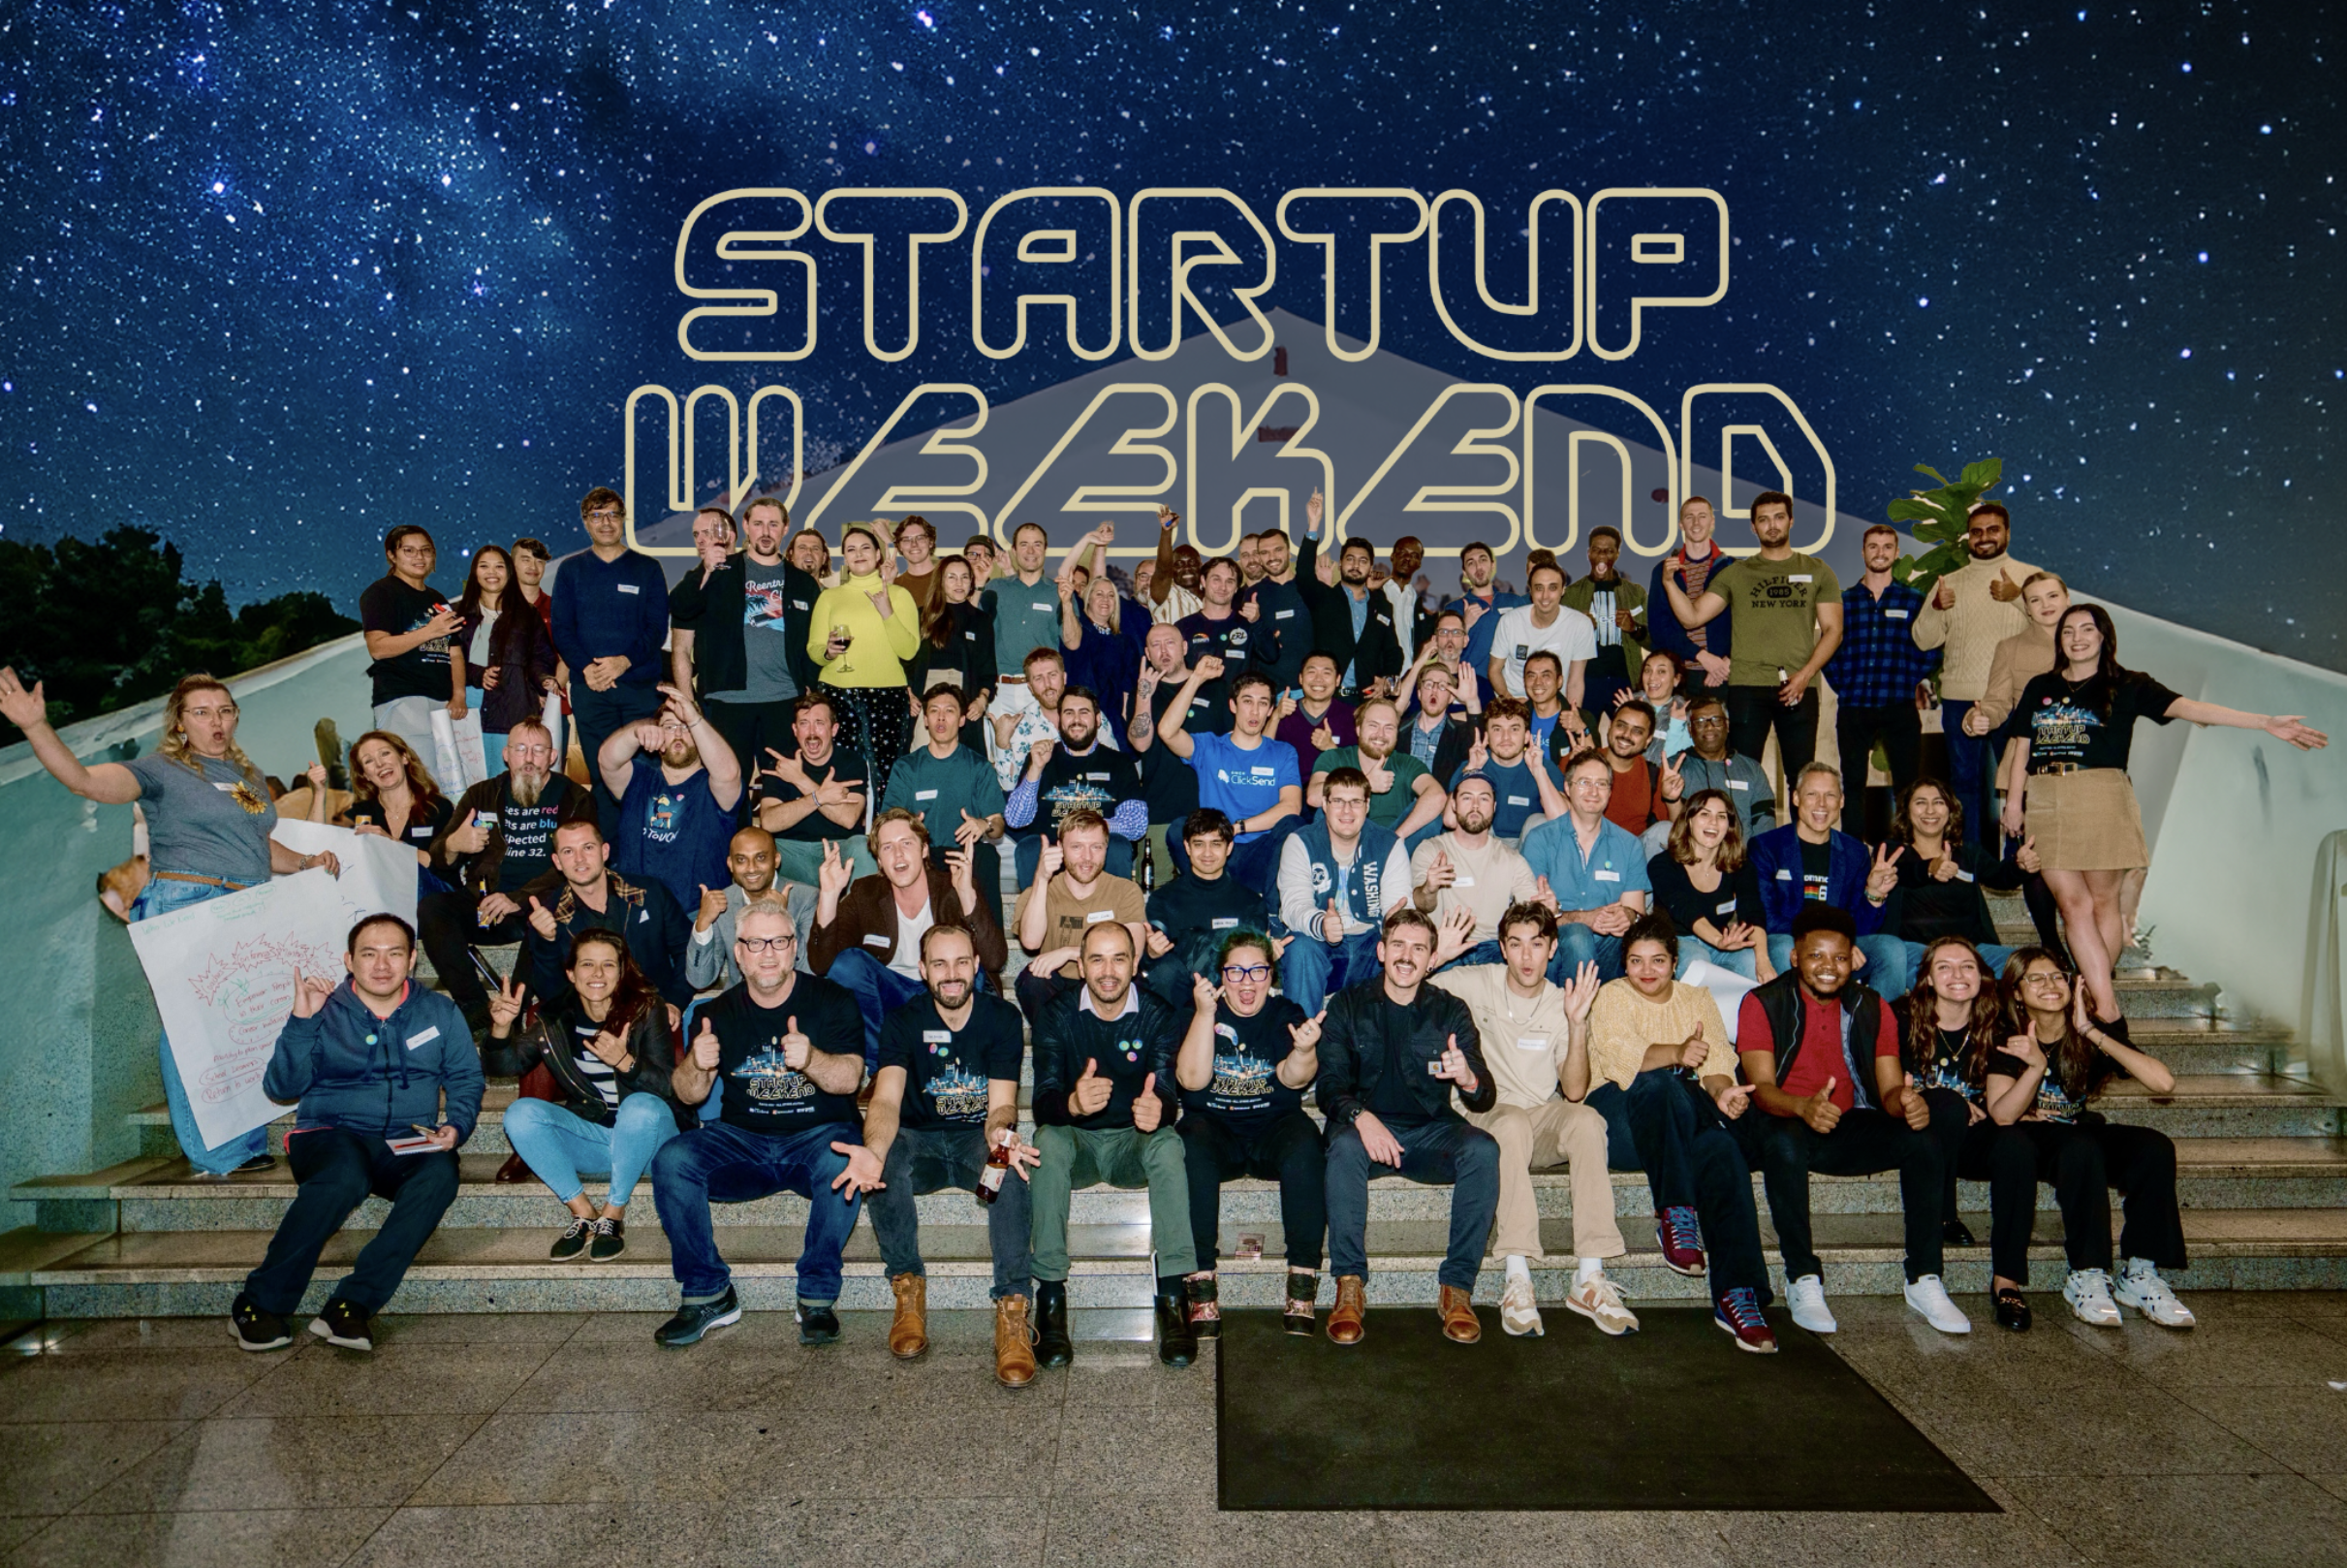 Unforgettable moments from Startup Weekend #20, All Stars Edition in Perth